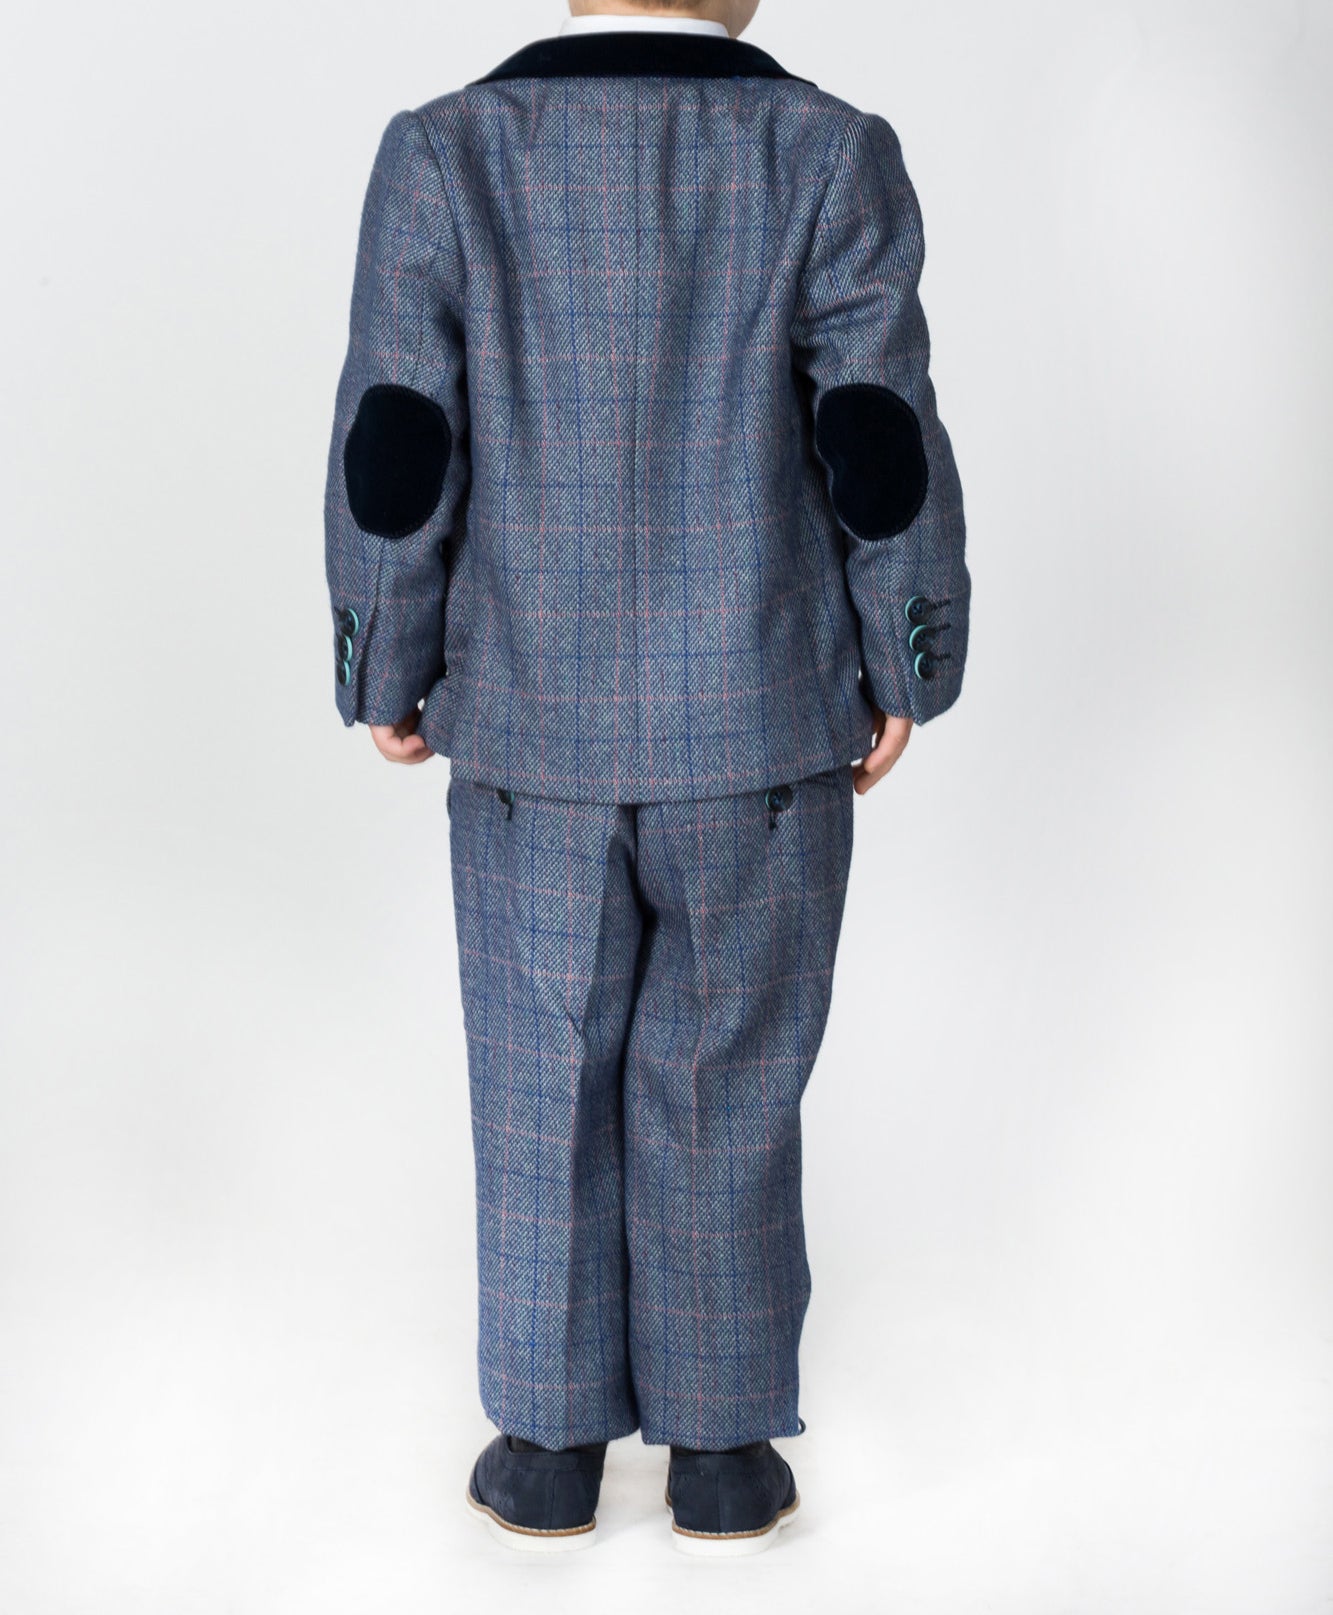 Marc darcy Hilton Blue checked children's Tweed Suit